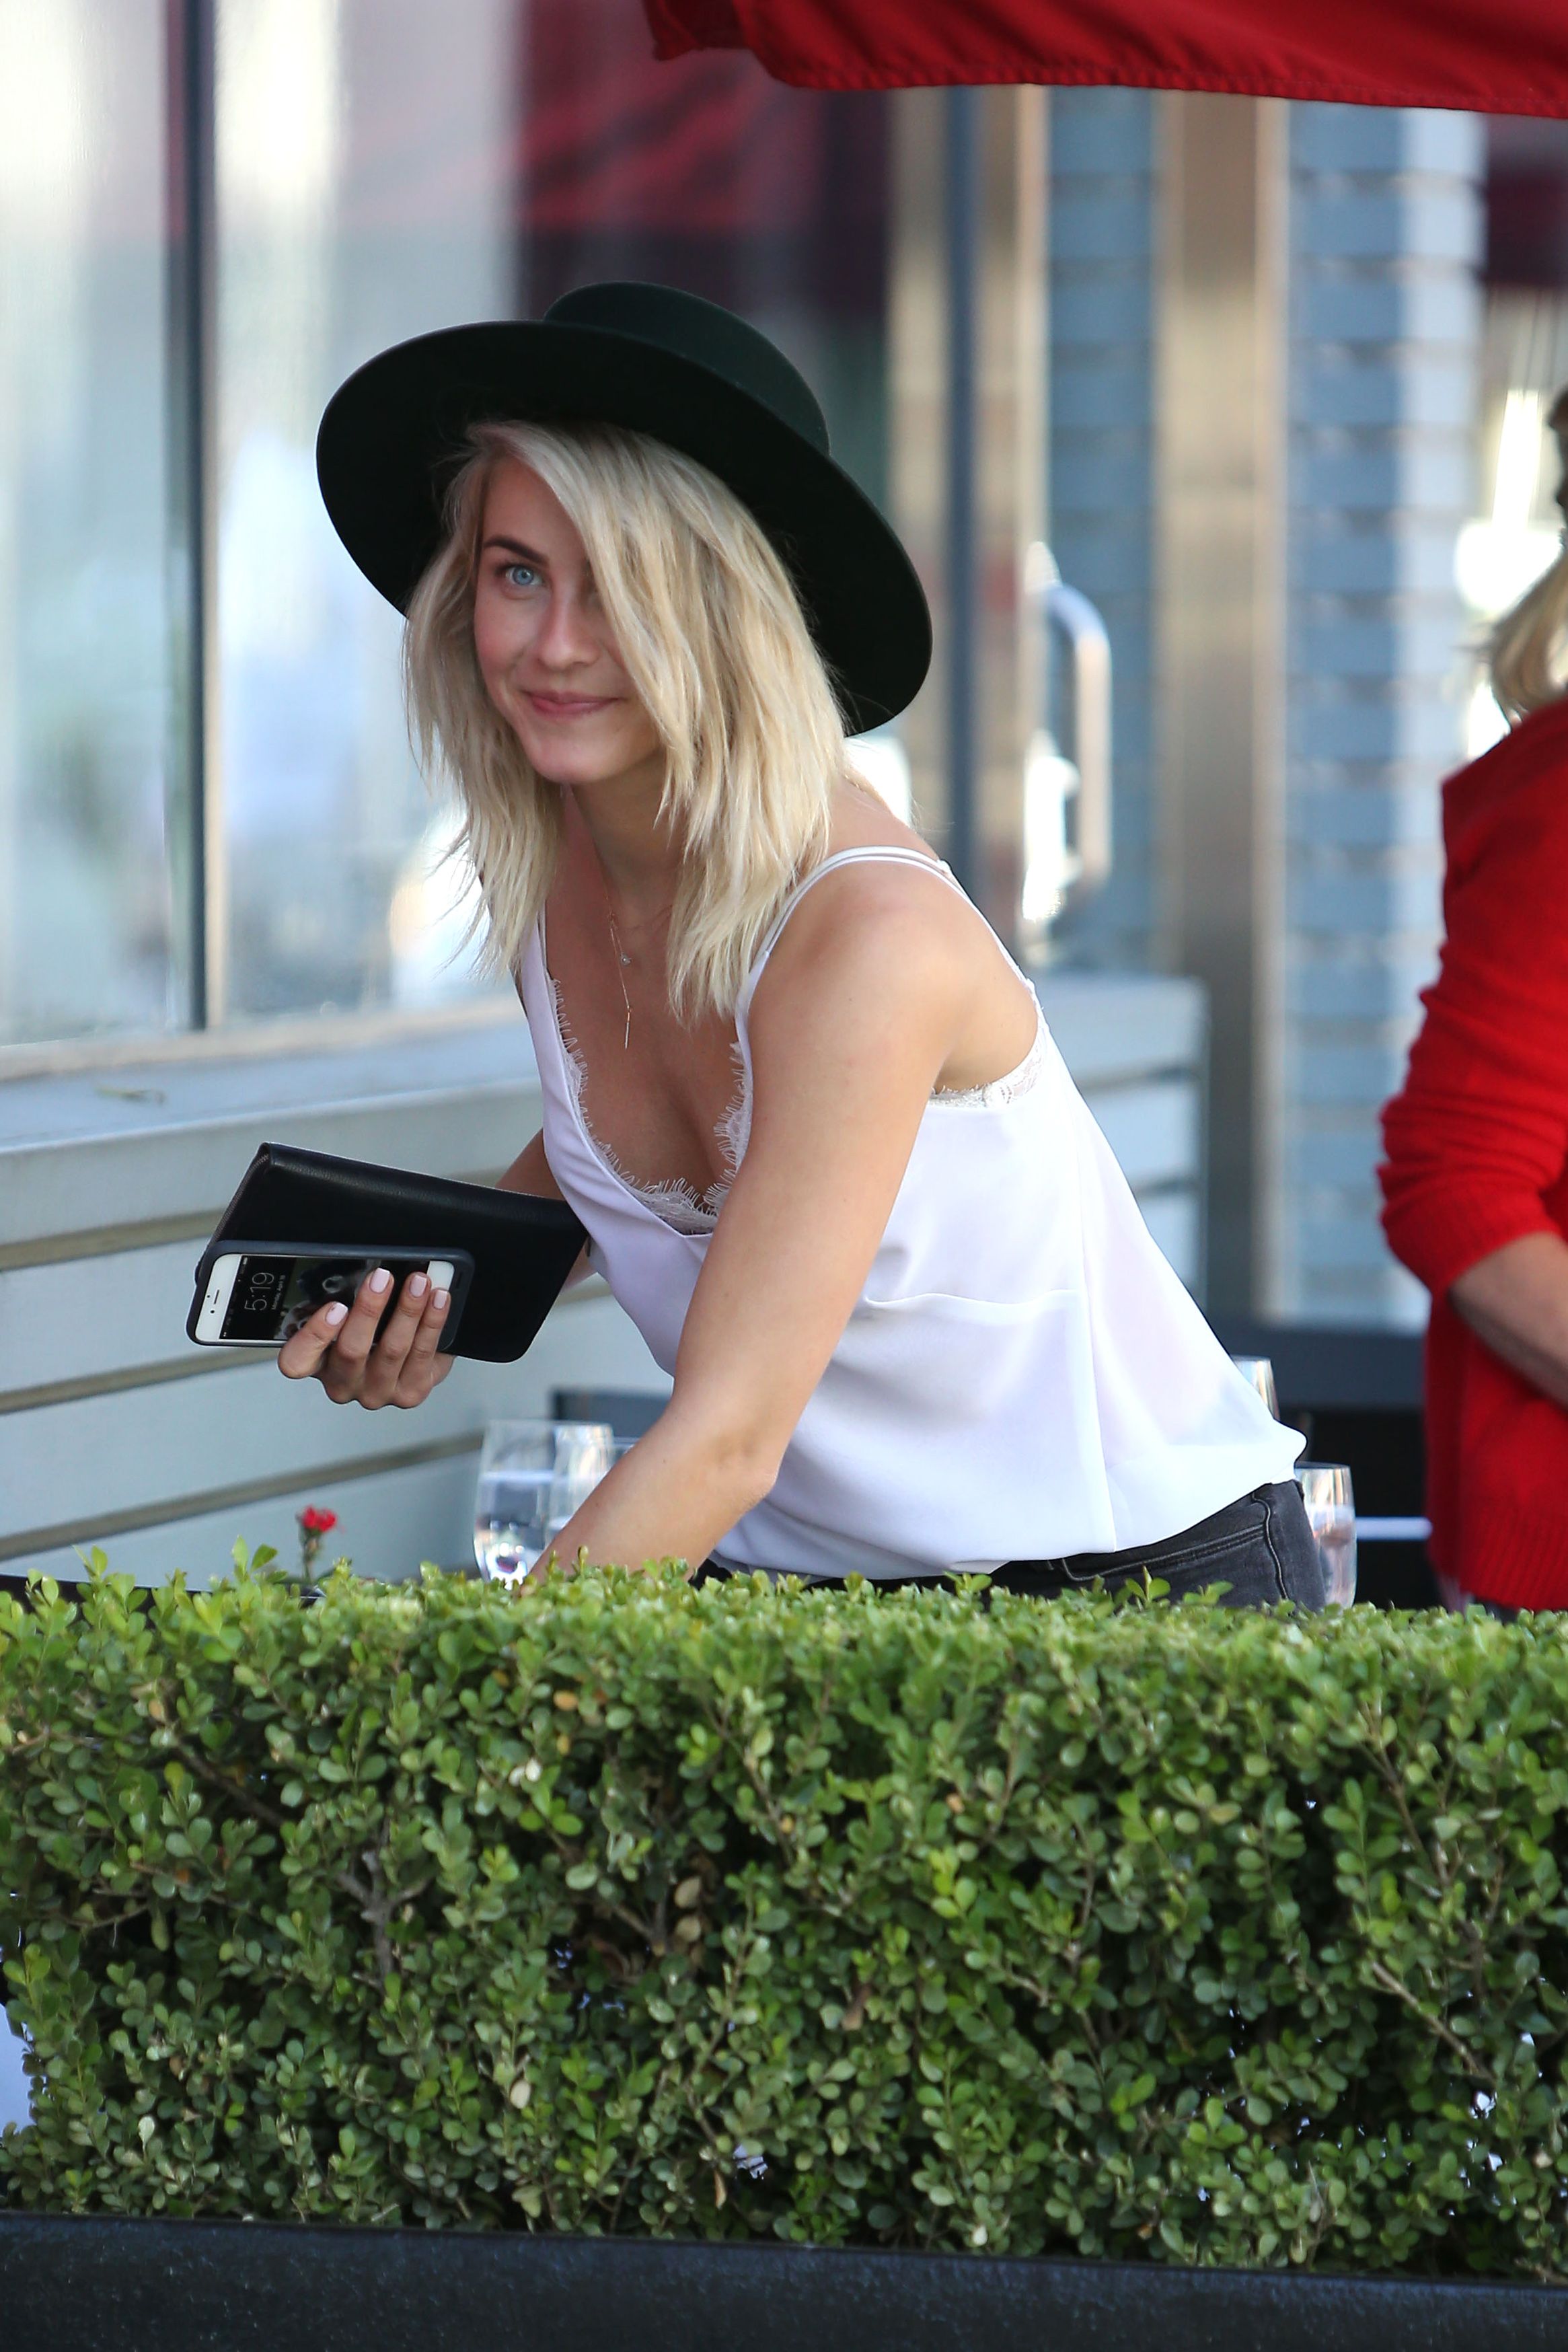 Julianne Hough Downblouse Cleavage While Picking Up A Box